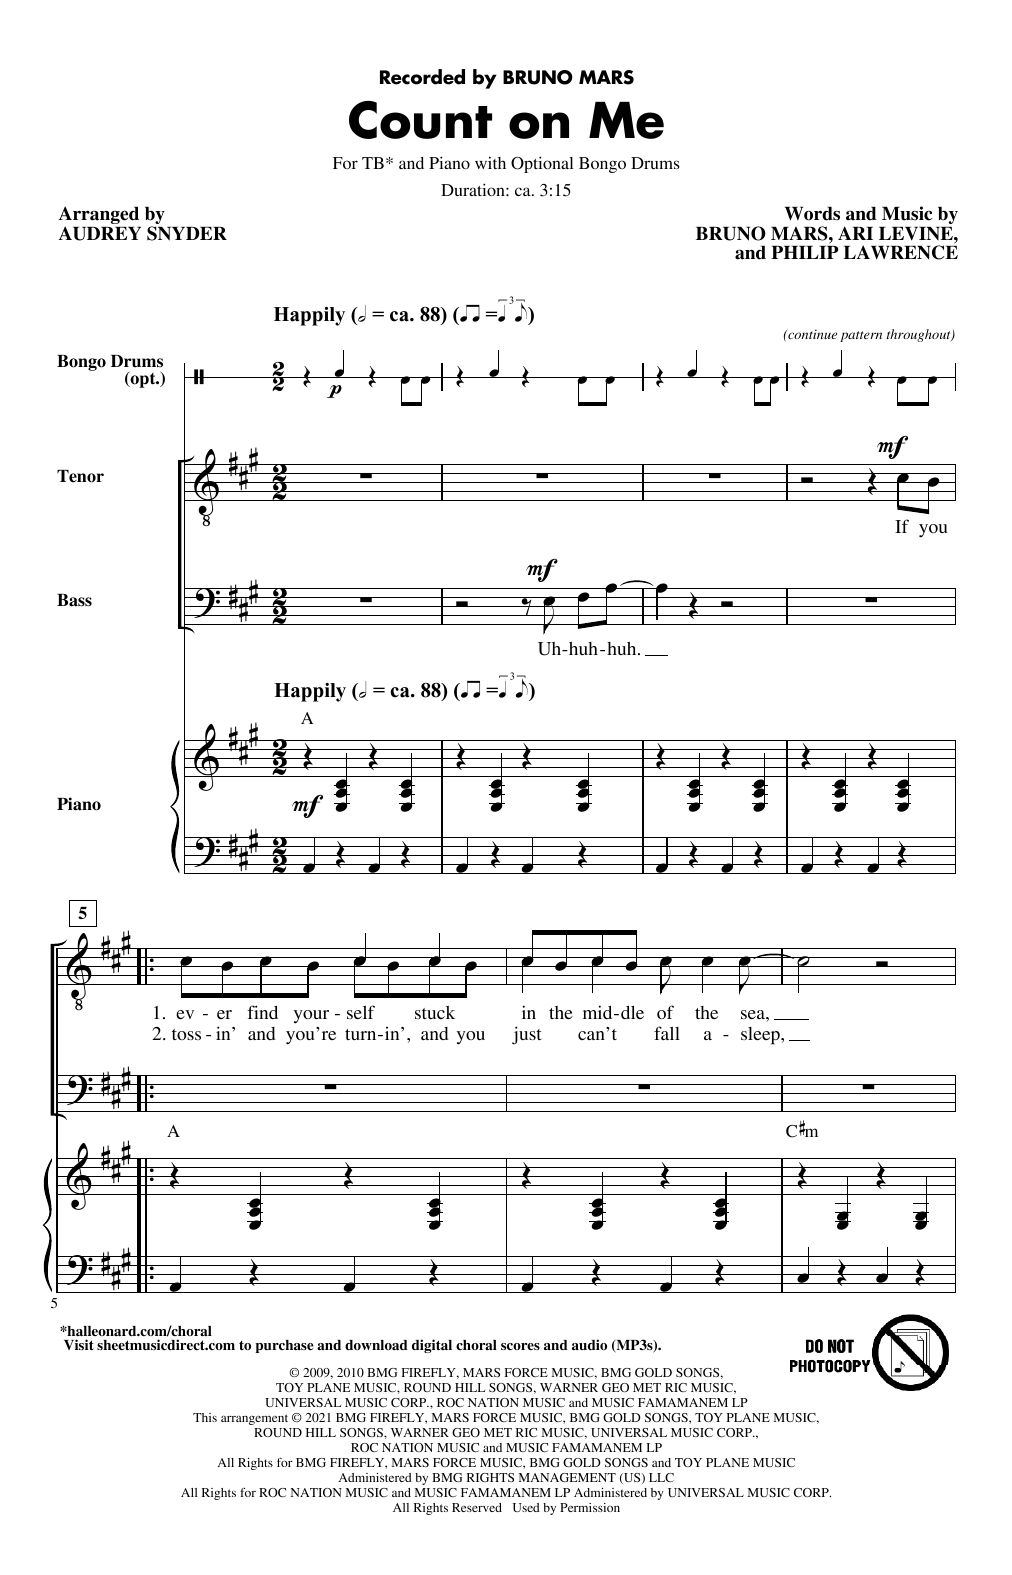 Bruno Mars Count On Me (arr. Audrey Snyder) sheet music notes and chords. Download Printable PDF.